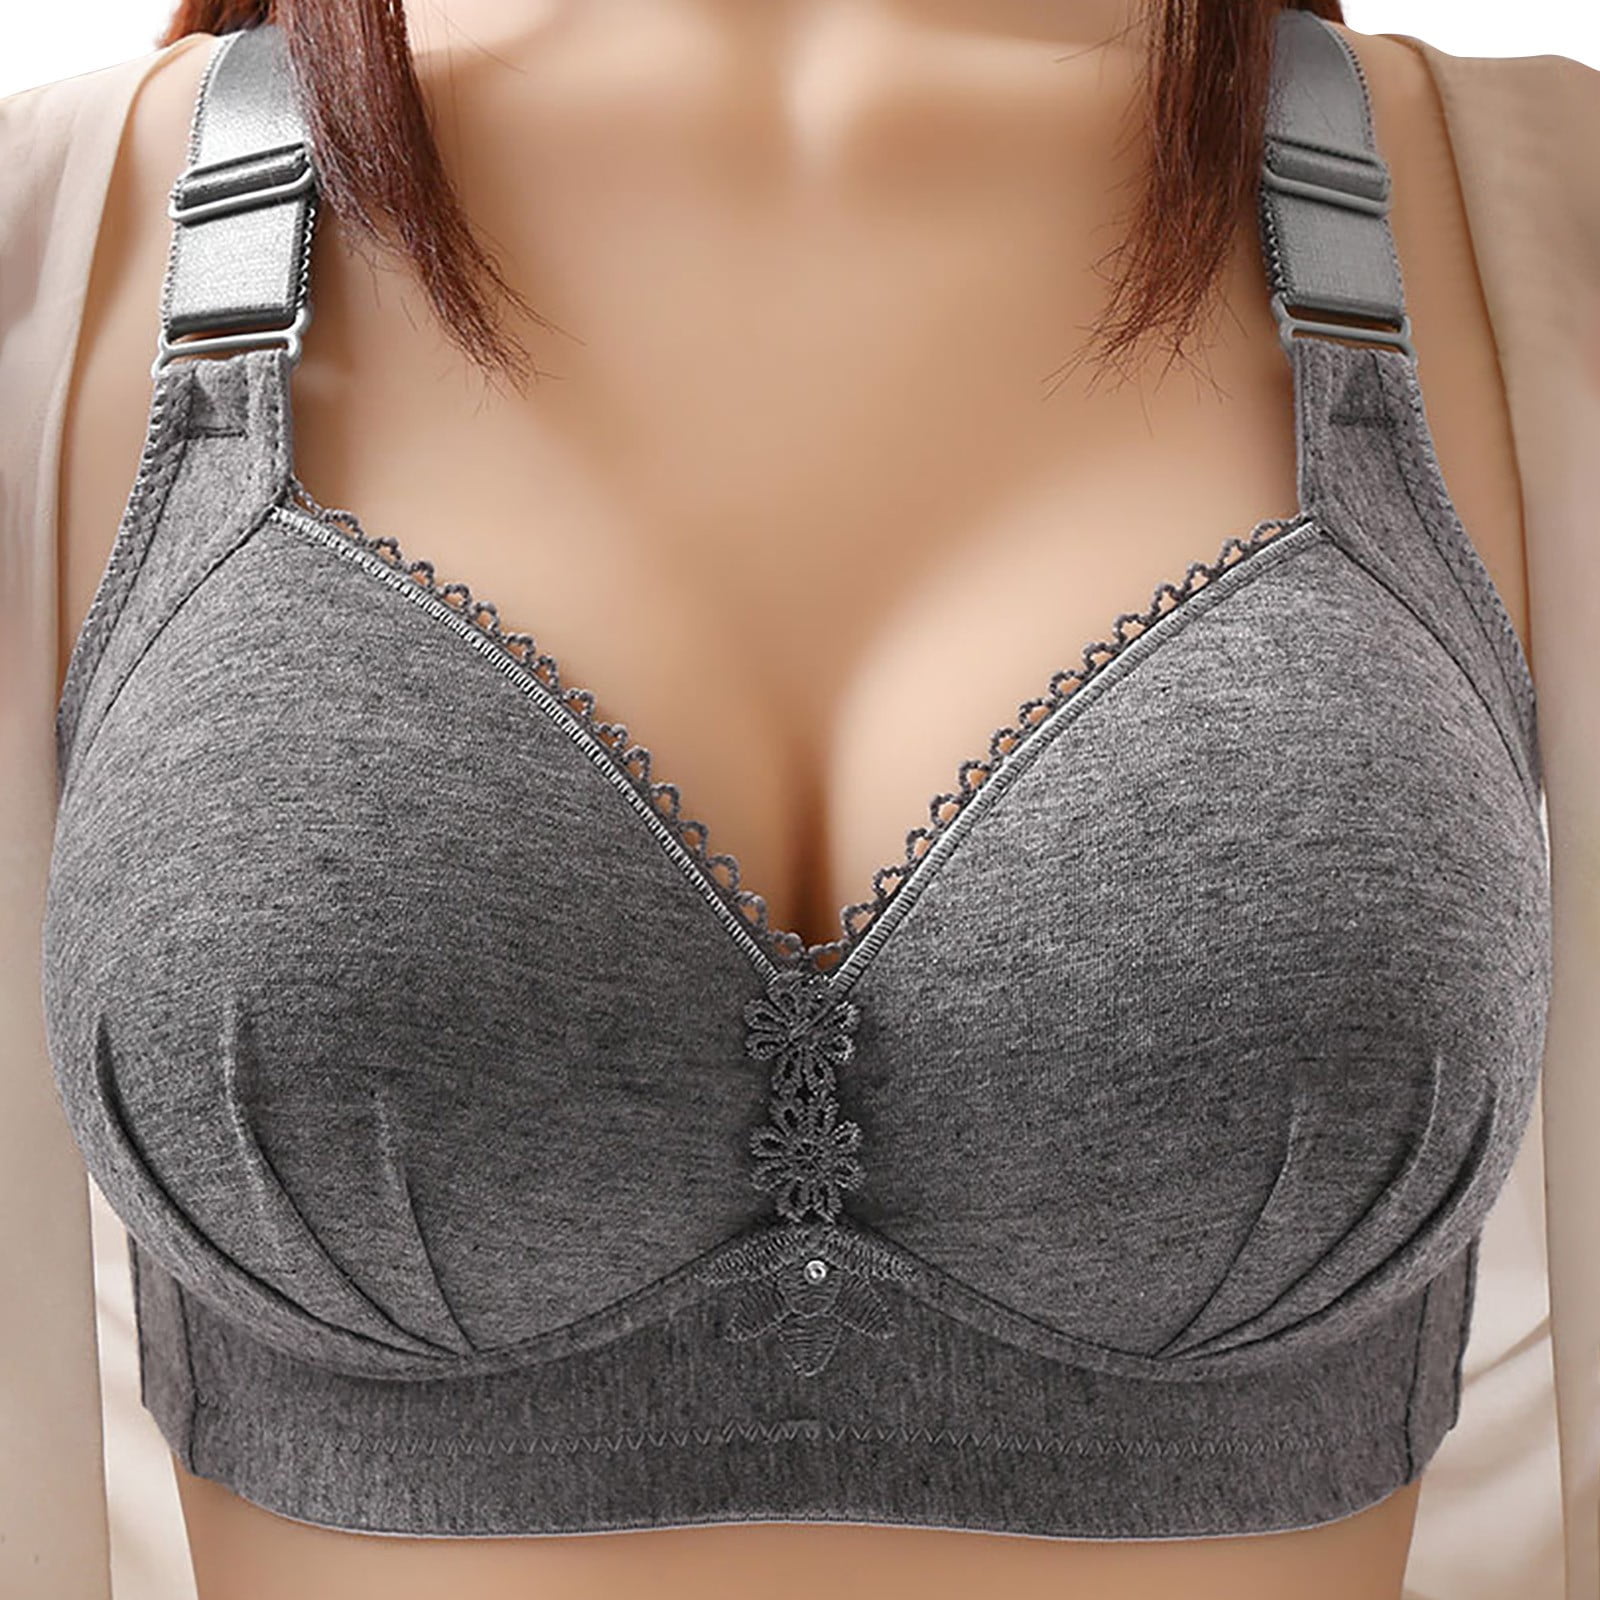 adviicd Tshirt Bras for Women Womens Seamed Soft Cup Wirefree Cotton Bra D  36